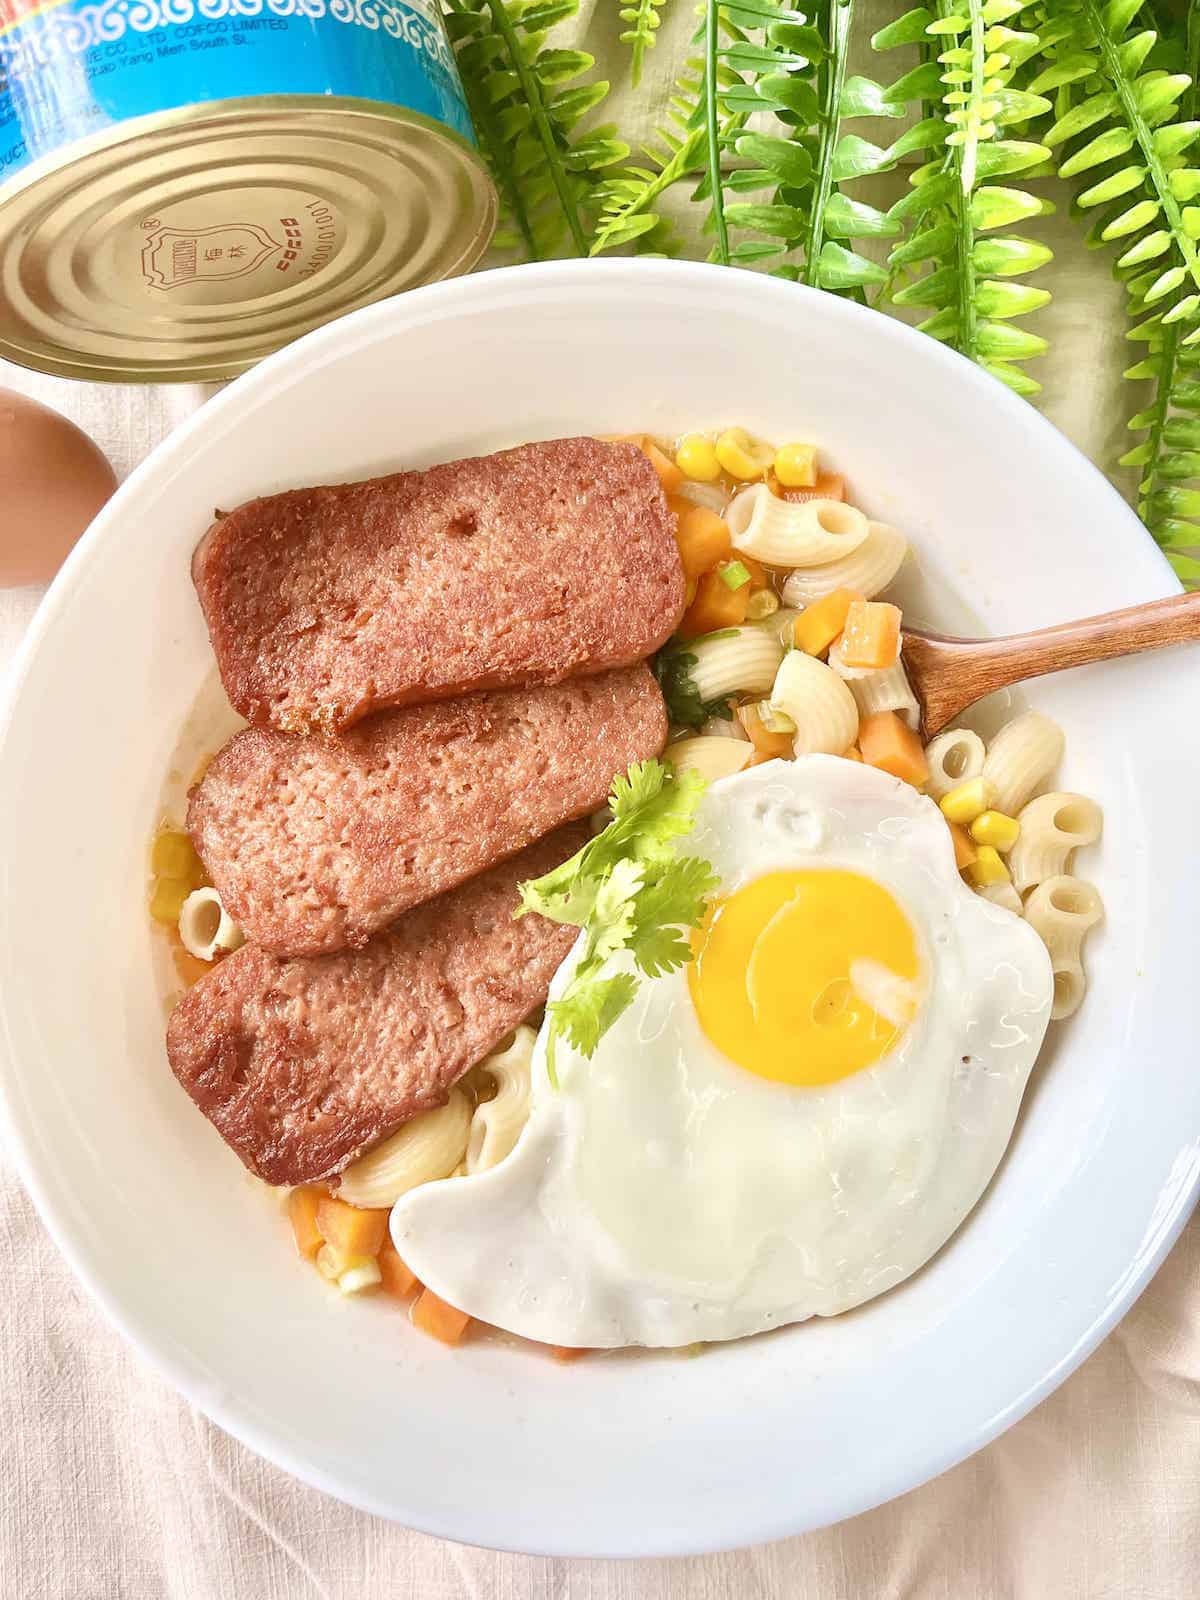 A bowl of macaroni with a fried egg, corn, carrots and luncheon meat.